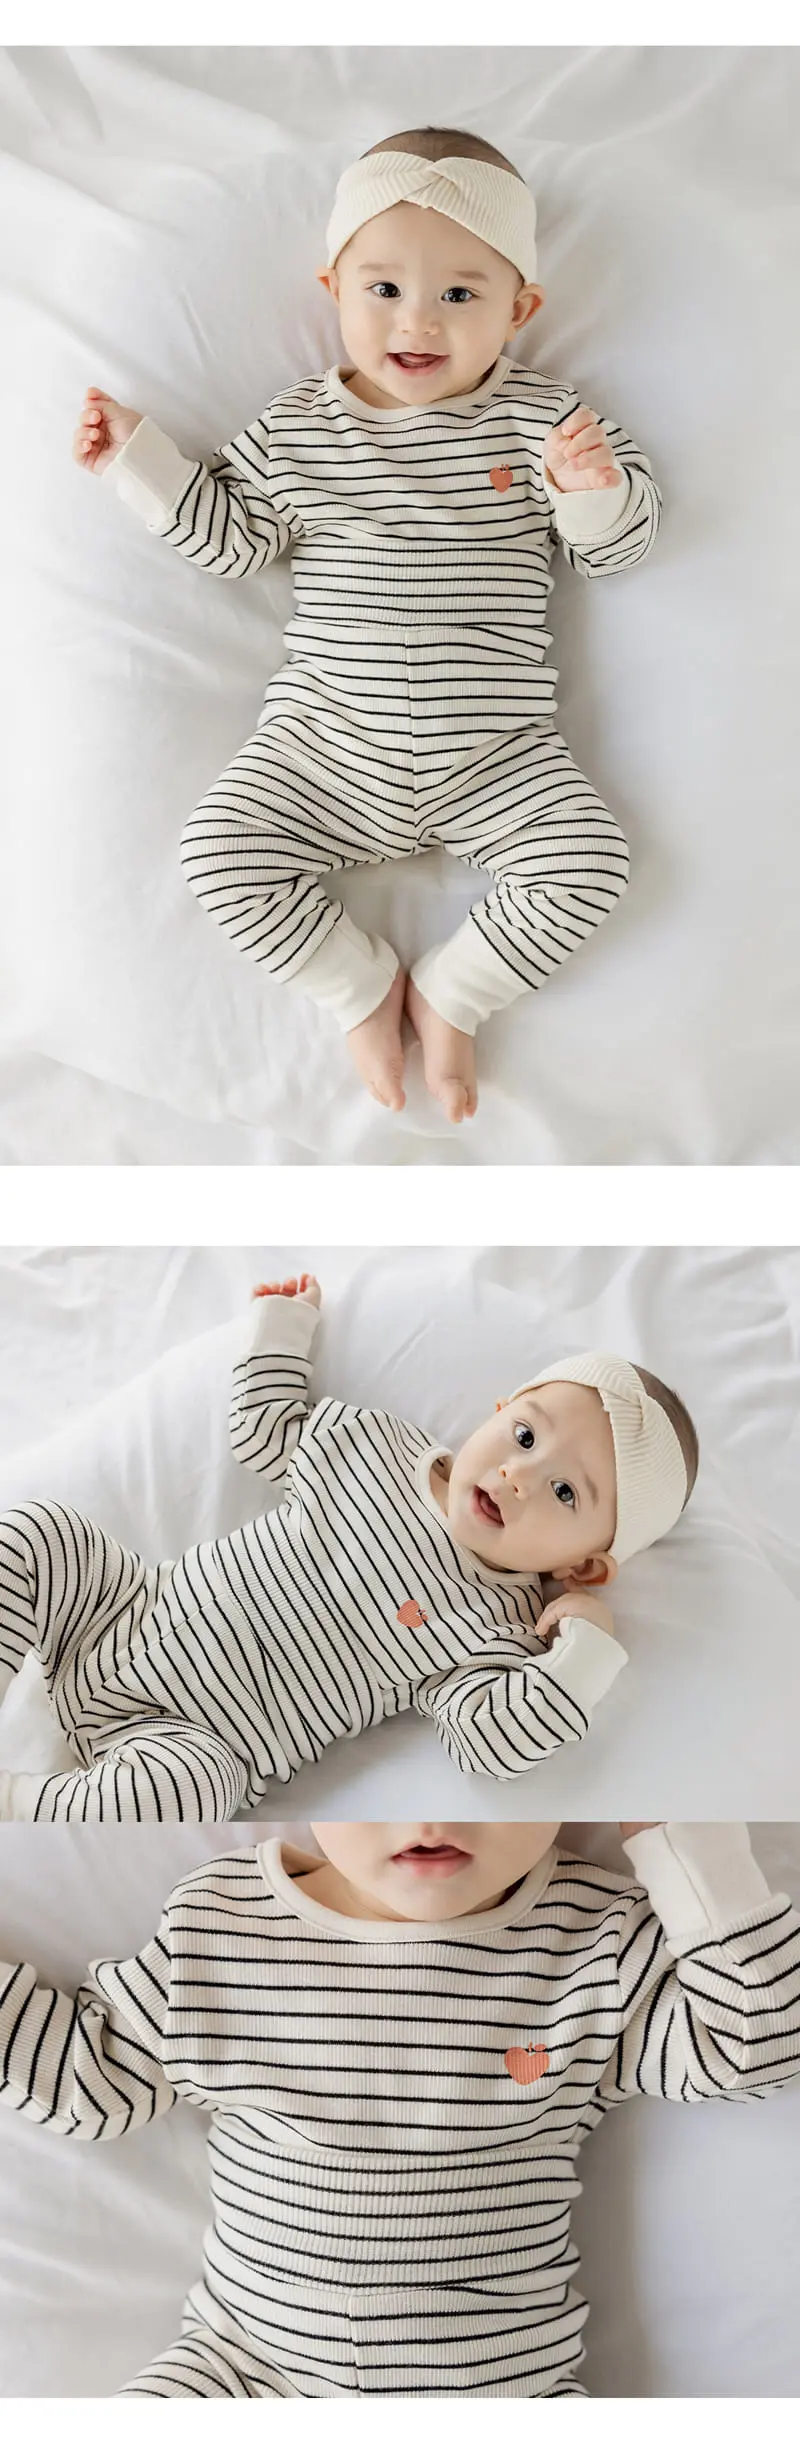 Kids Clara - Korean Baby Fashion - #babyboutiqueclothing - Ylang Compy Belly Baby Easy Wear - 5